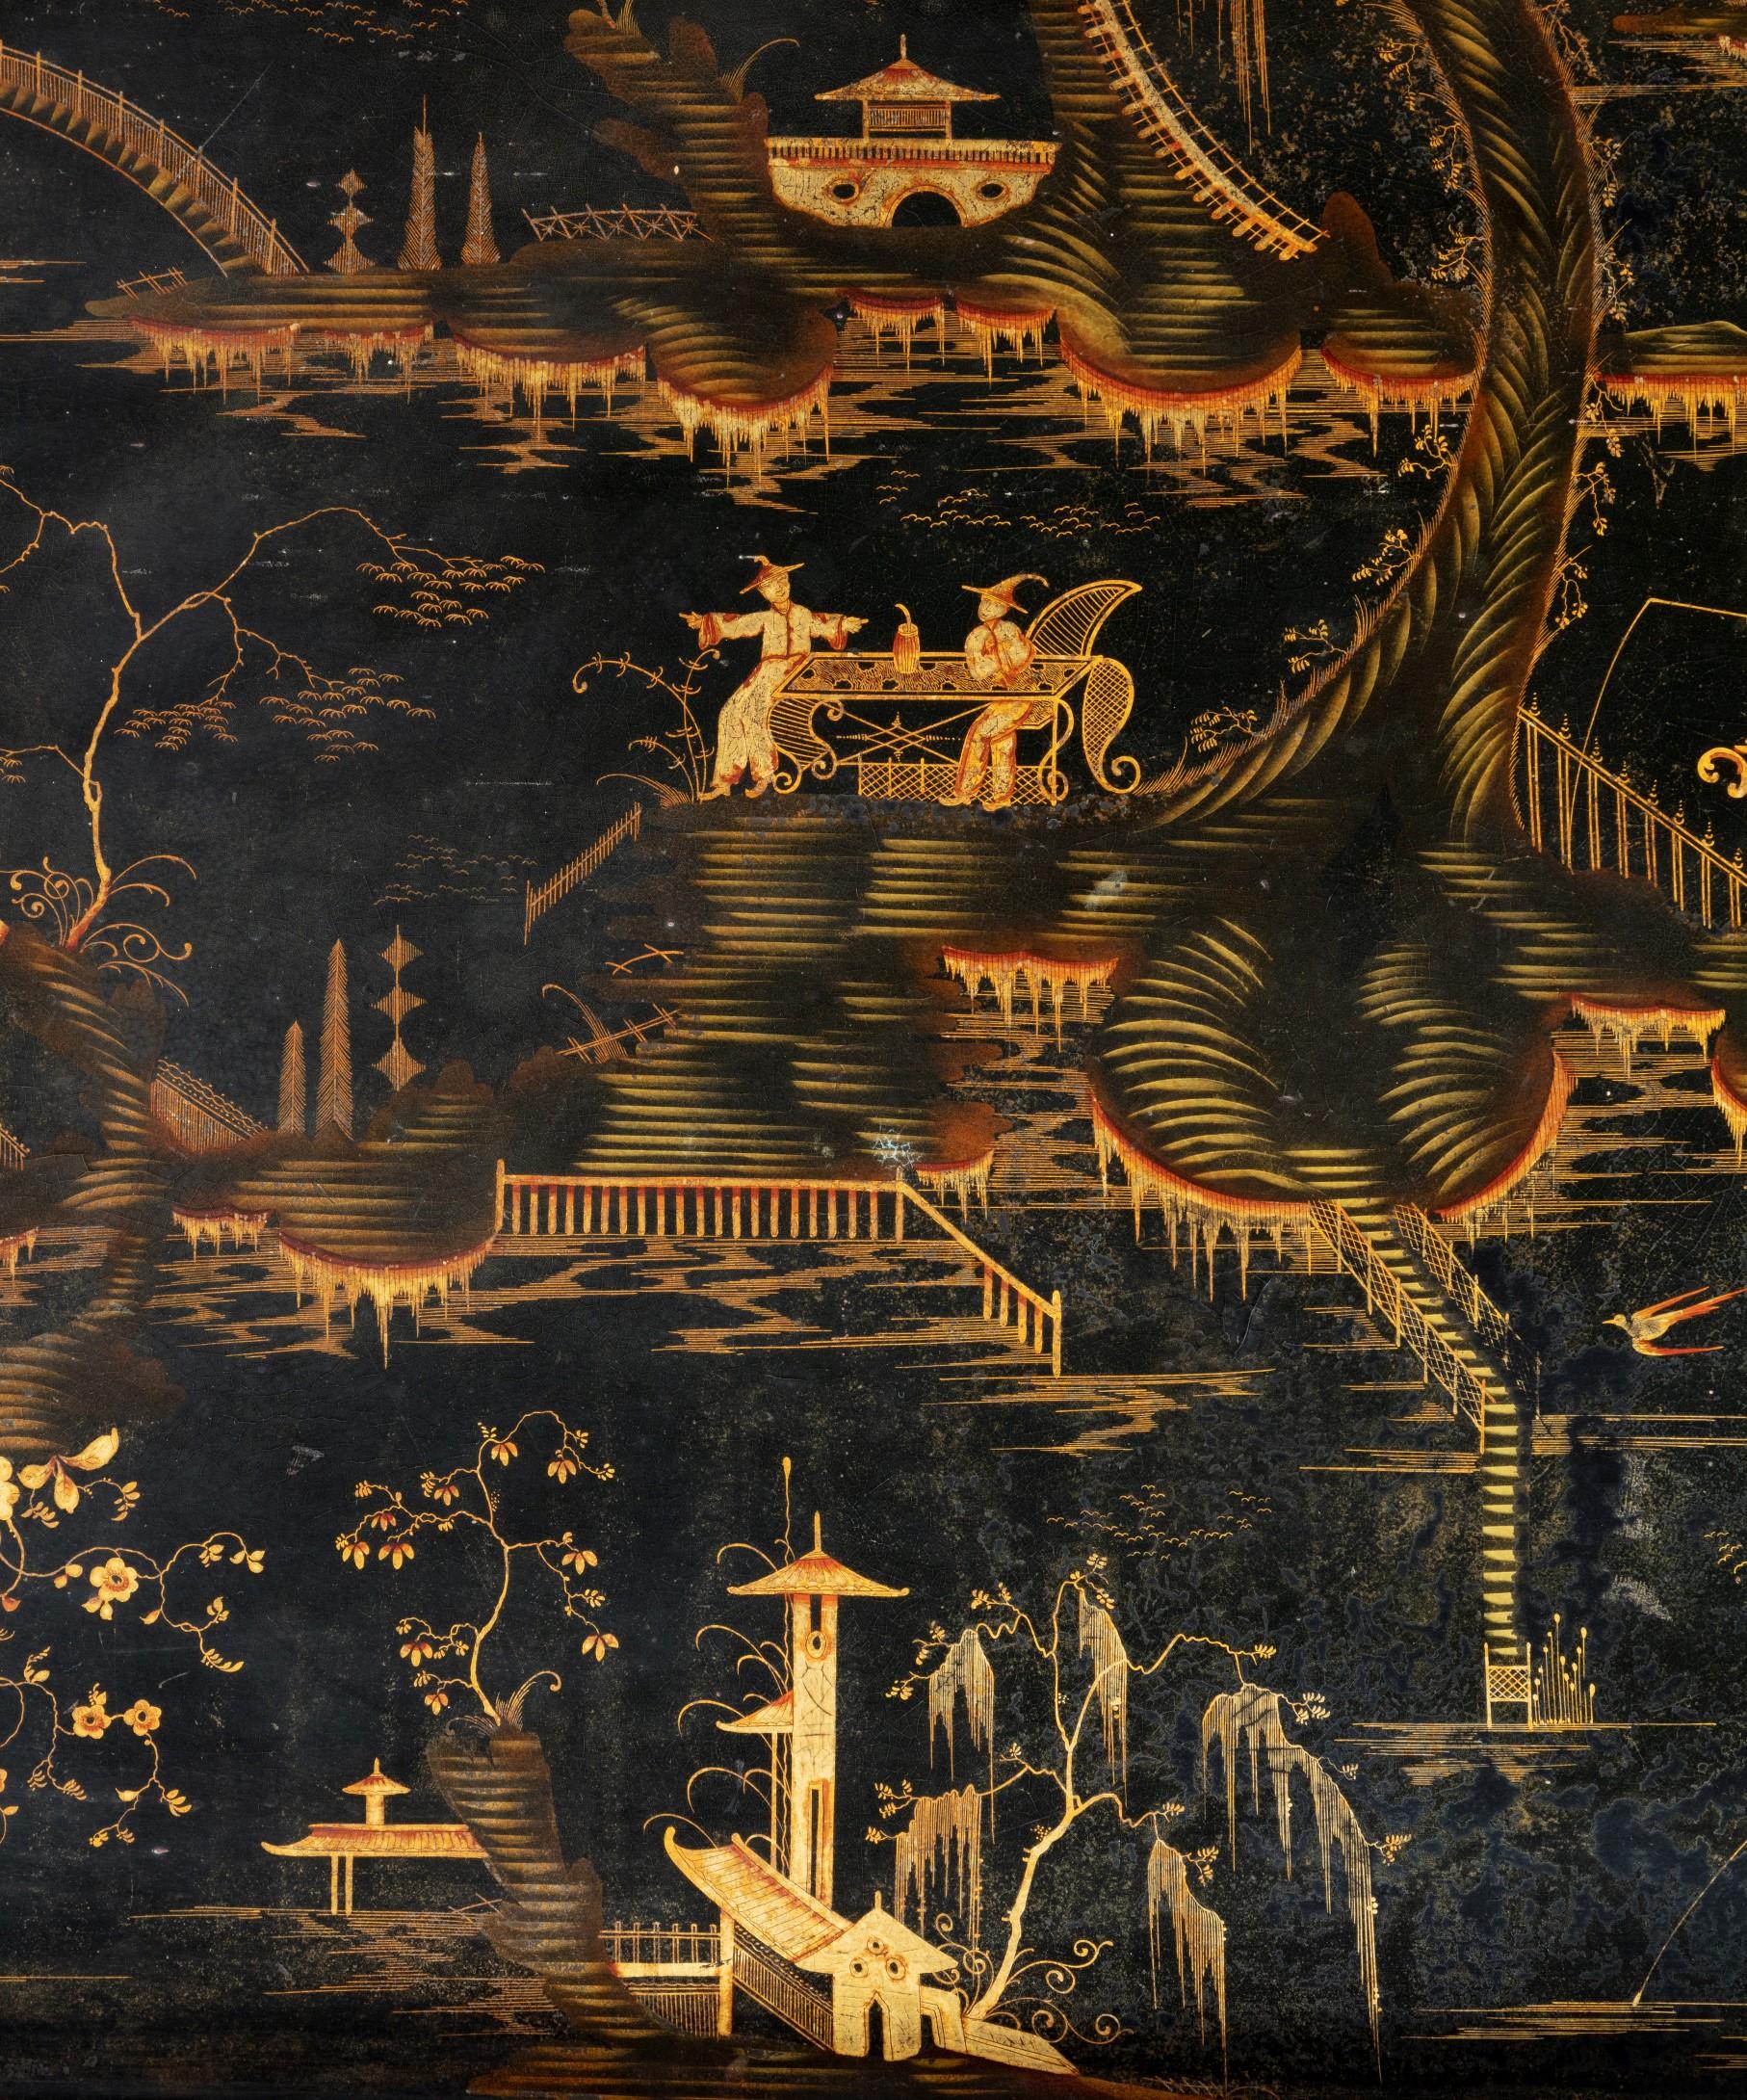 A large Regency period Chinese export lacquer tray; the tray decorated with a mythical Chinese garden landscape filled with pagodas;railings and fishermen.